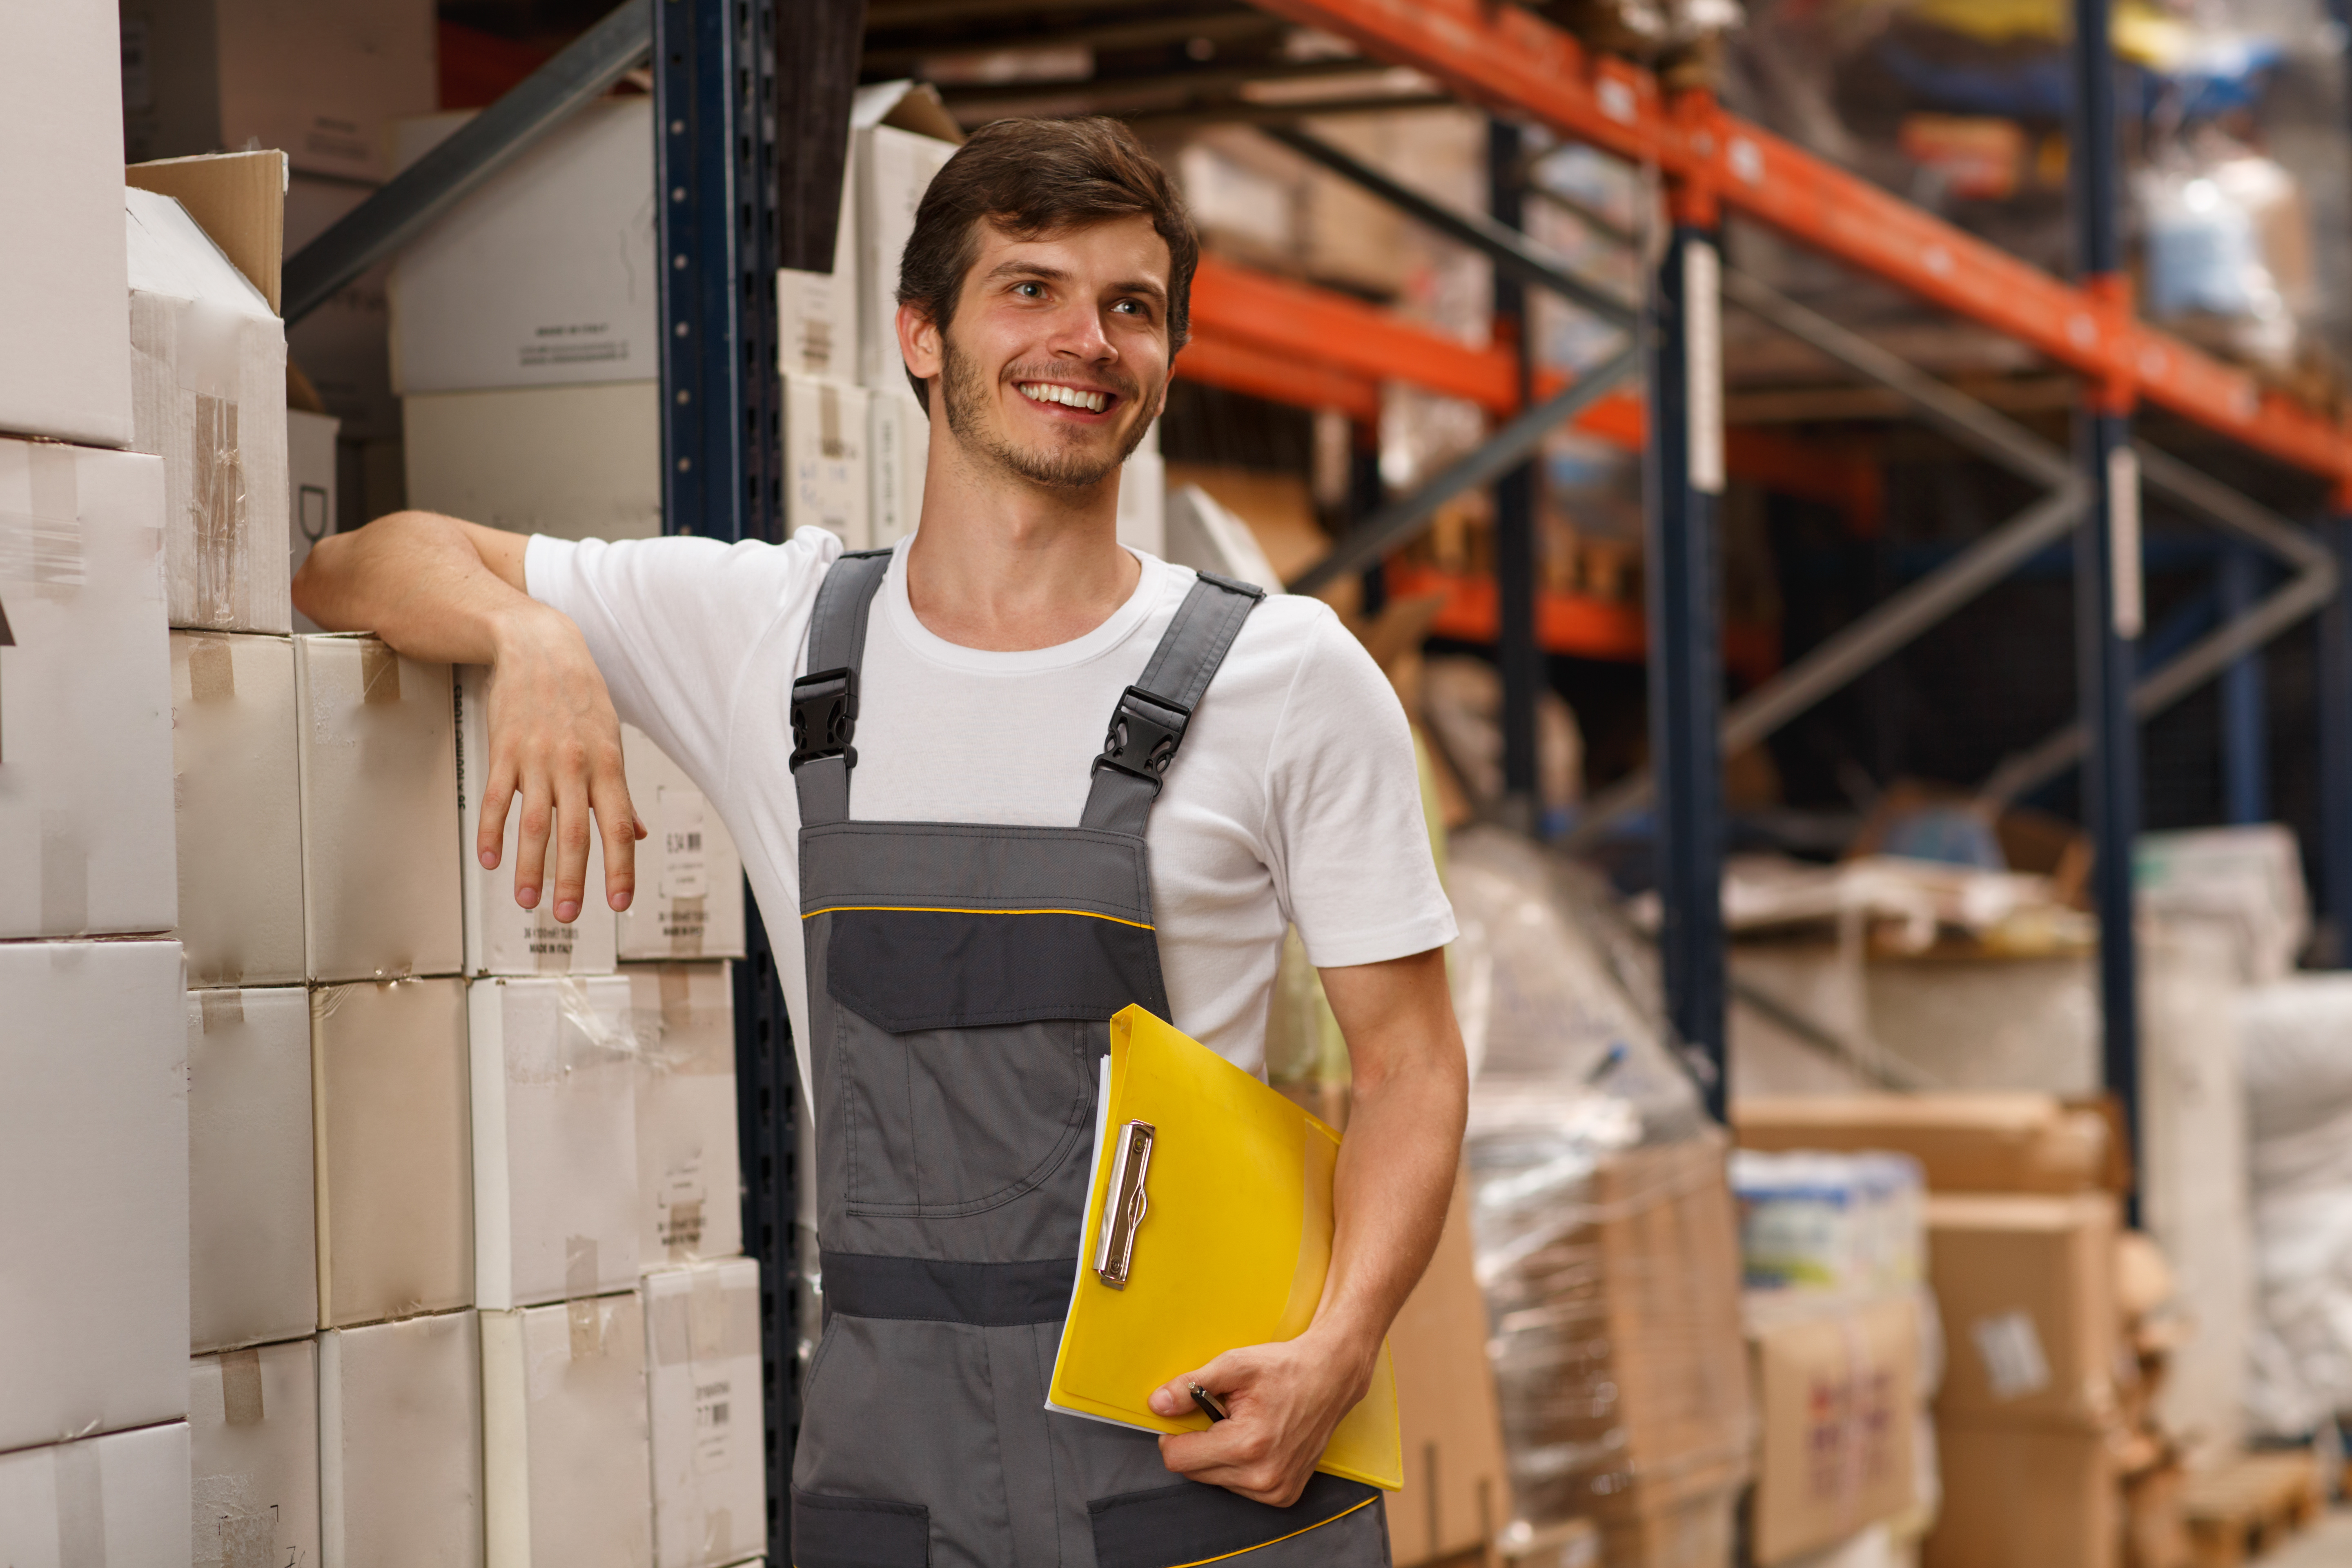 Cheerful worker wearing uniform and white t shirt, holding yellow clipboard. Handsome man smiling, standing and leaning on white boxes in warehouse. Concept of entrepot and commercial industry.